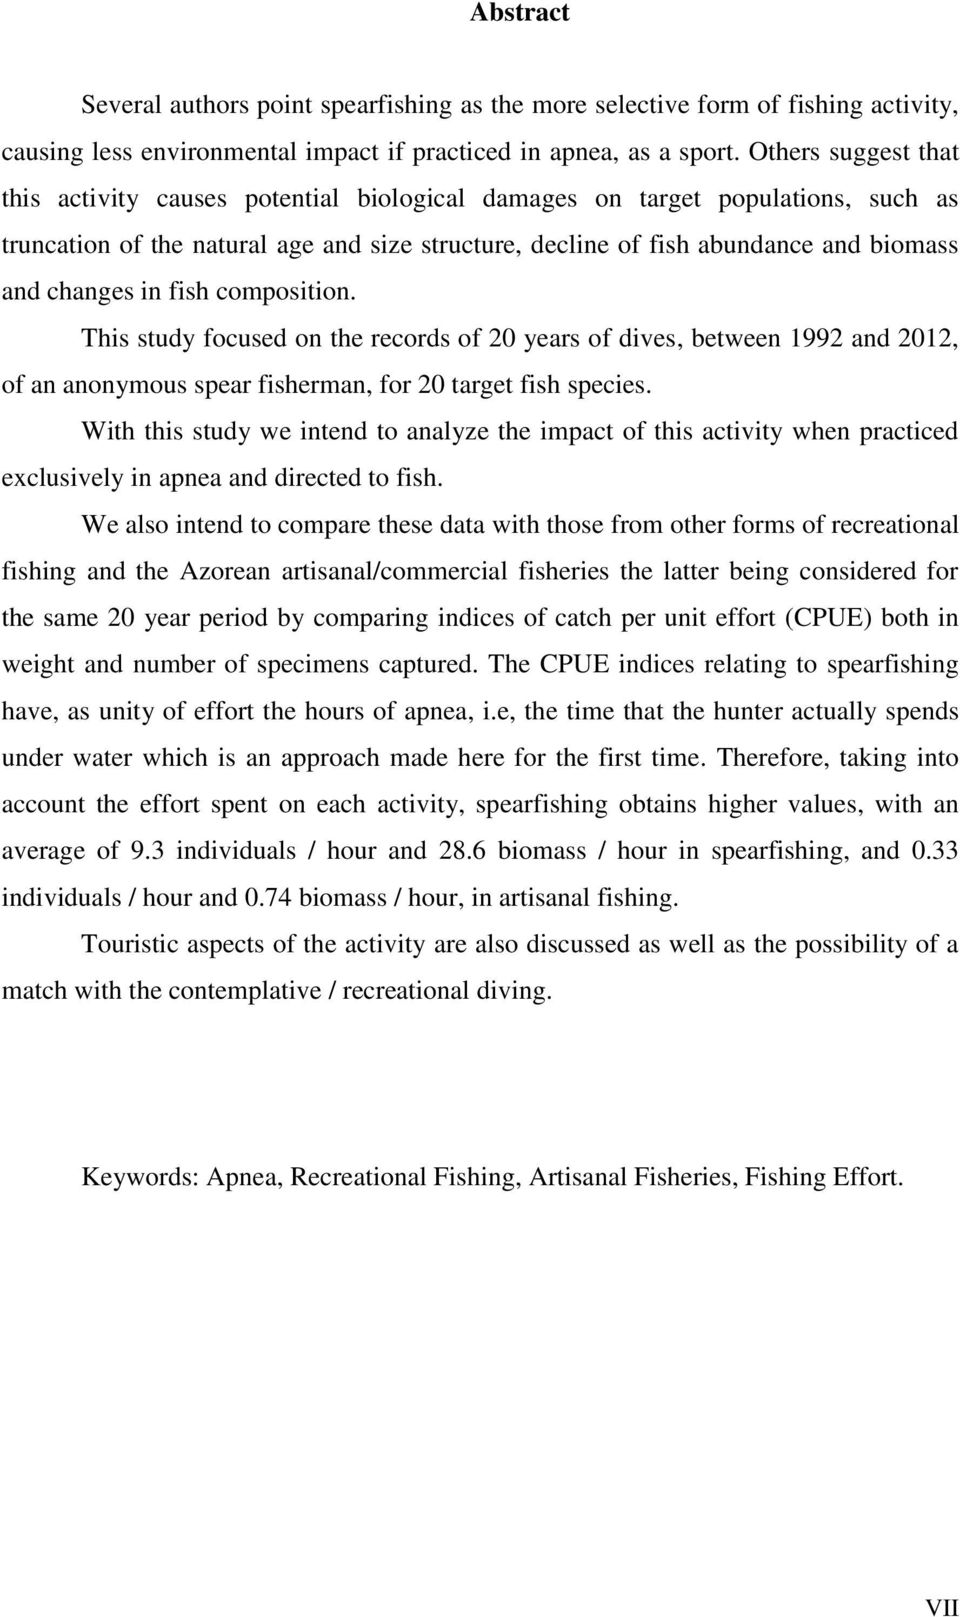 changes in fish composition. This study focused on the records of 20 years of dives, between 1992 and 2012, of an anonymous spear fisherman, for 20 target fish species.